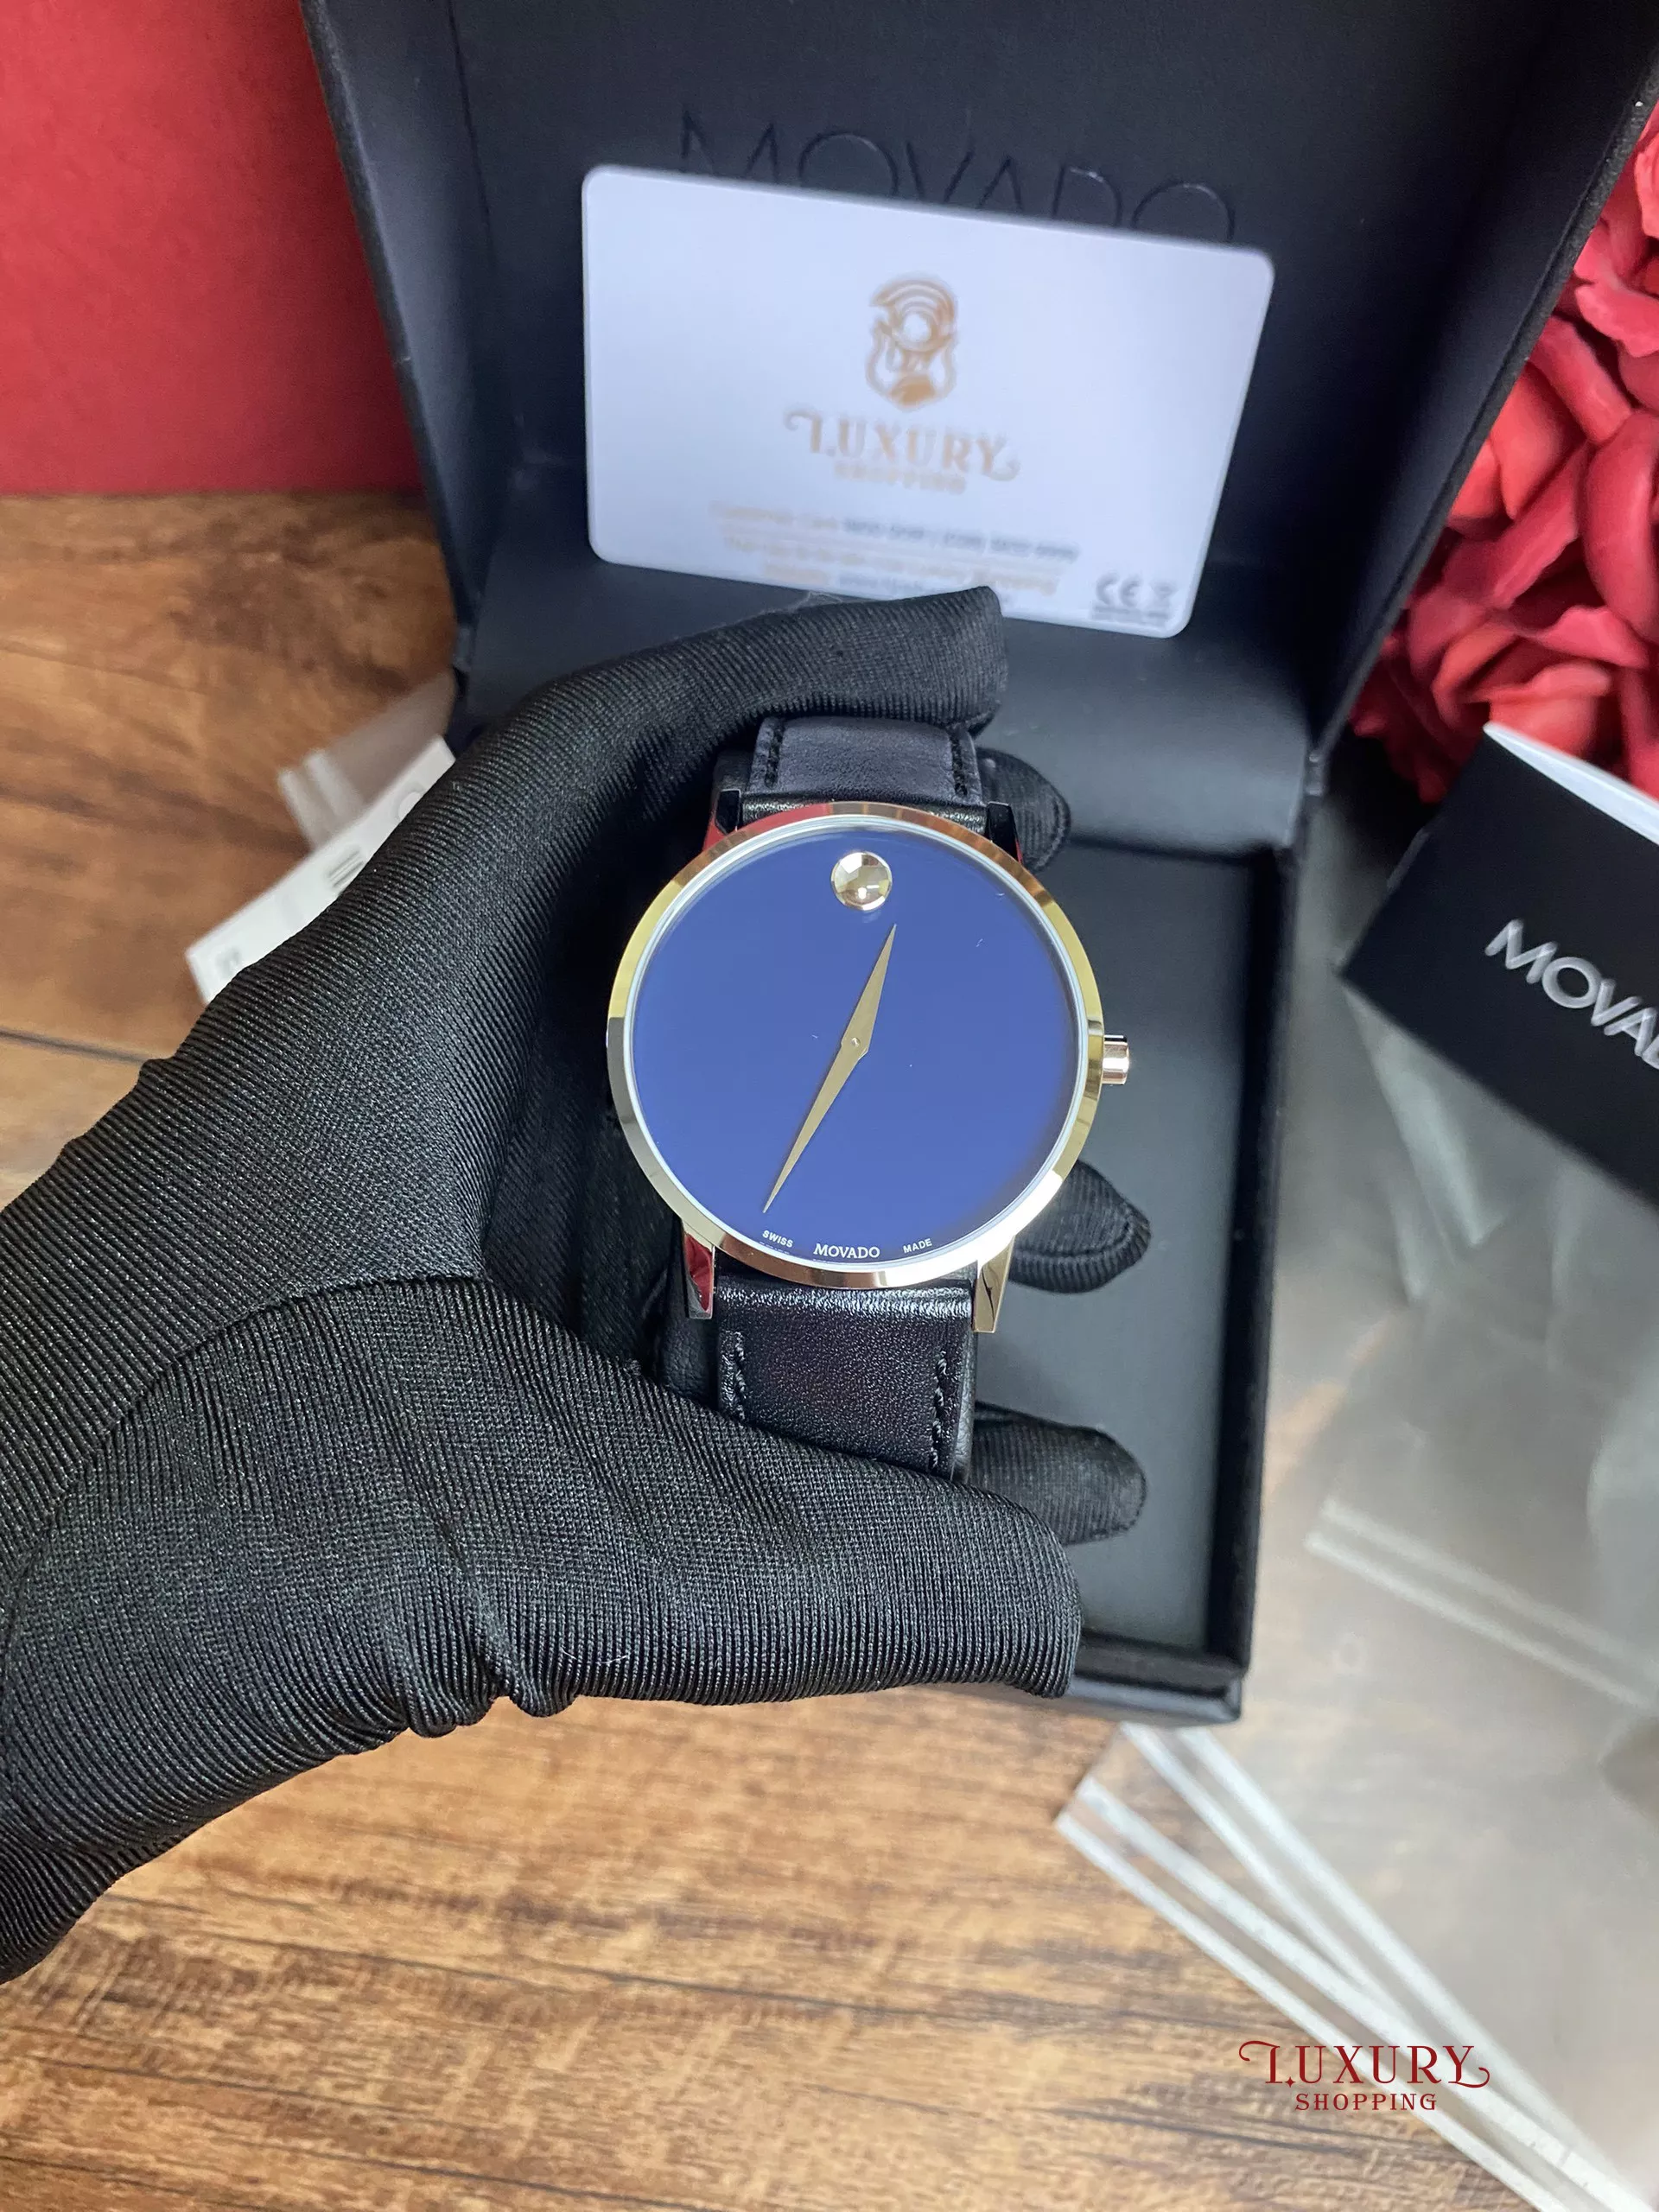 Movado Museum Watch 40mm